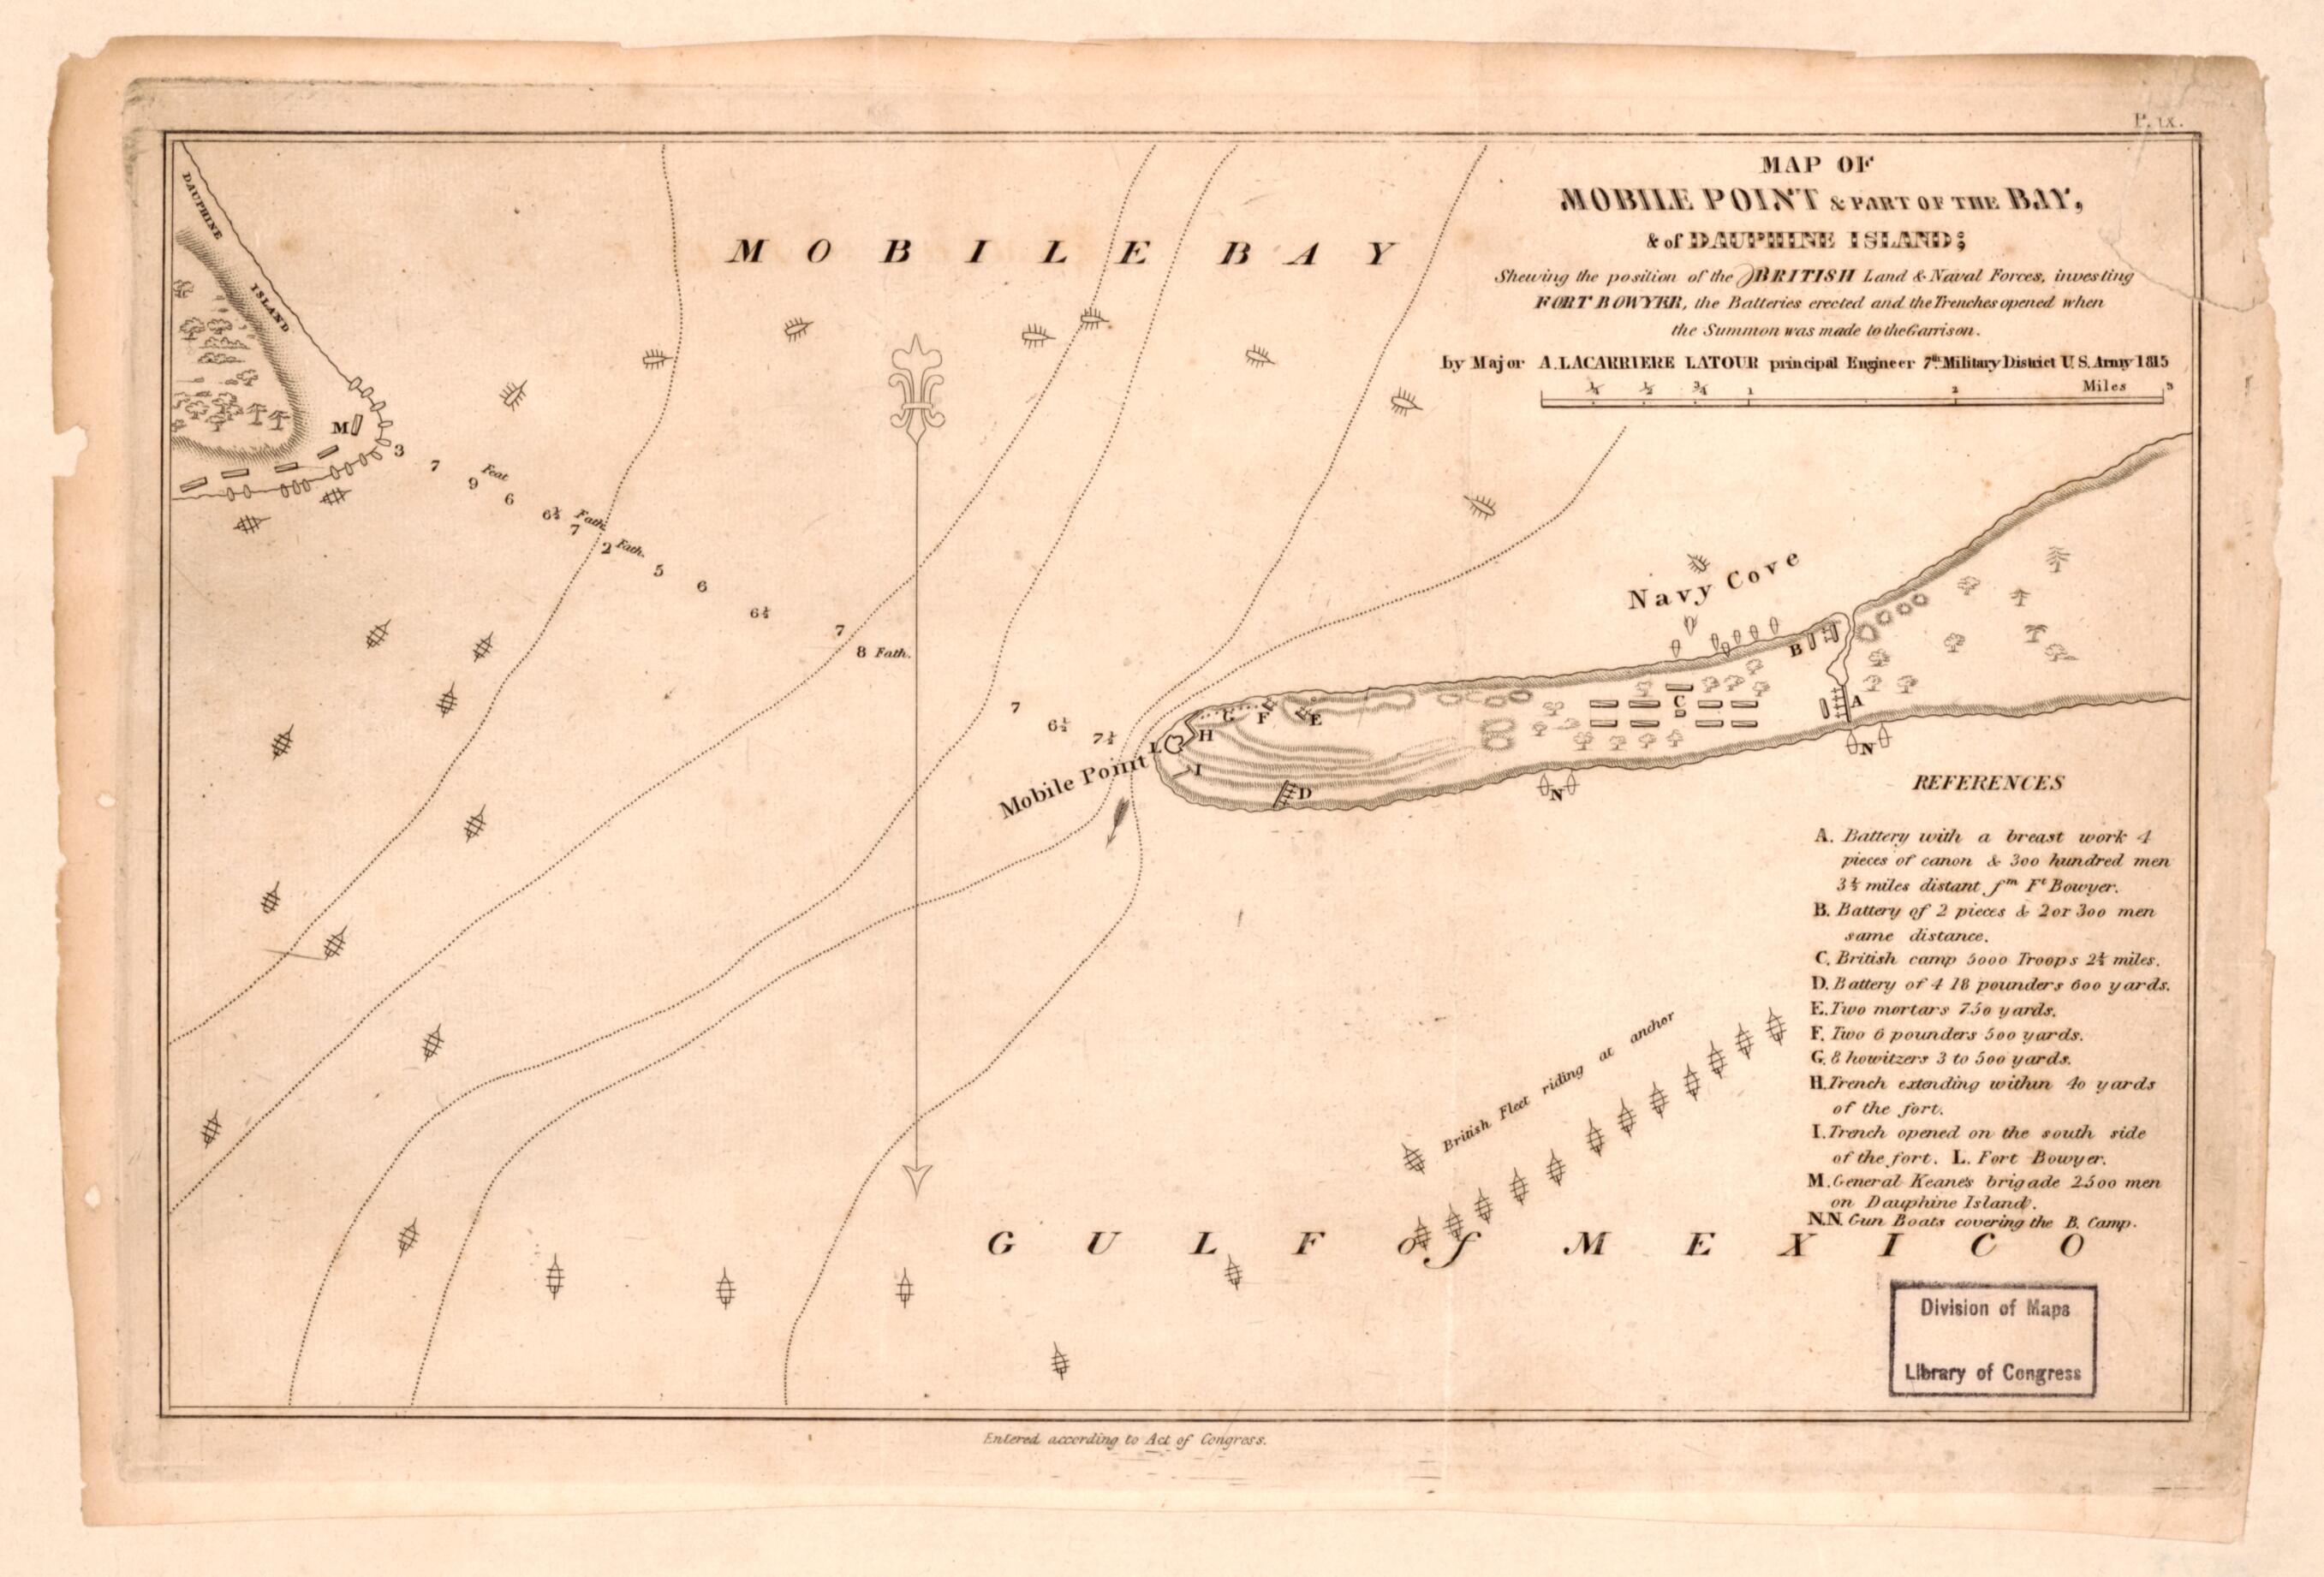 This old map of Map of Mobile Point &amp; Part of the Bay &amp; of Dauphine Island Shewing the Position of the British Land &amp; Naval Forces Investing Fort Bowyer, the Batteries Erected and the Trenches Opened When the Summon Was Made to the Garrison from 1815 was